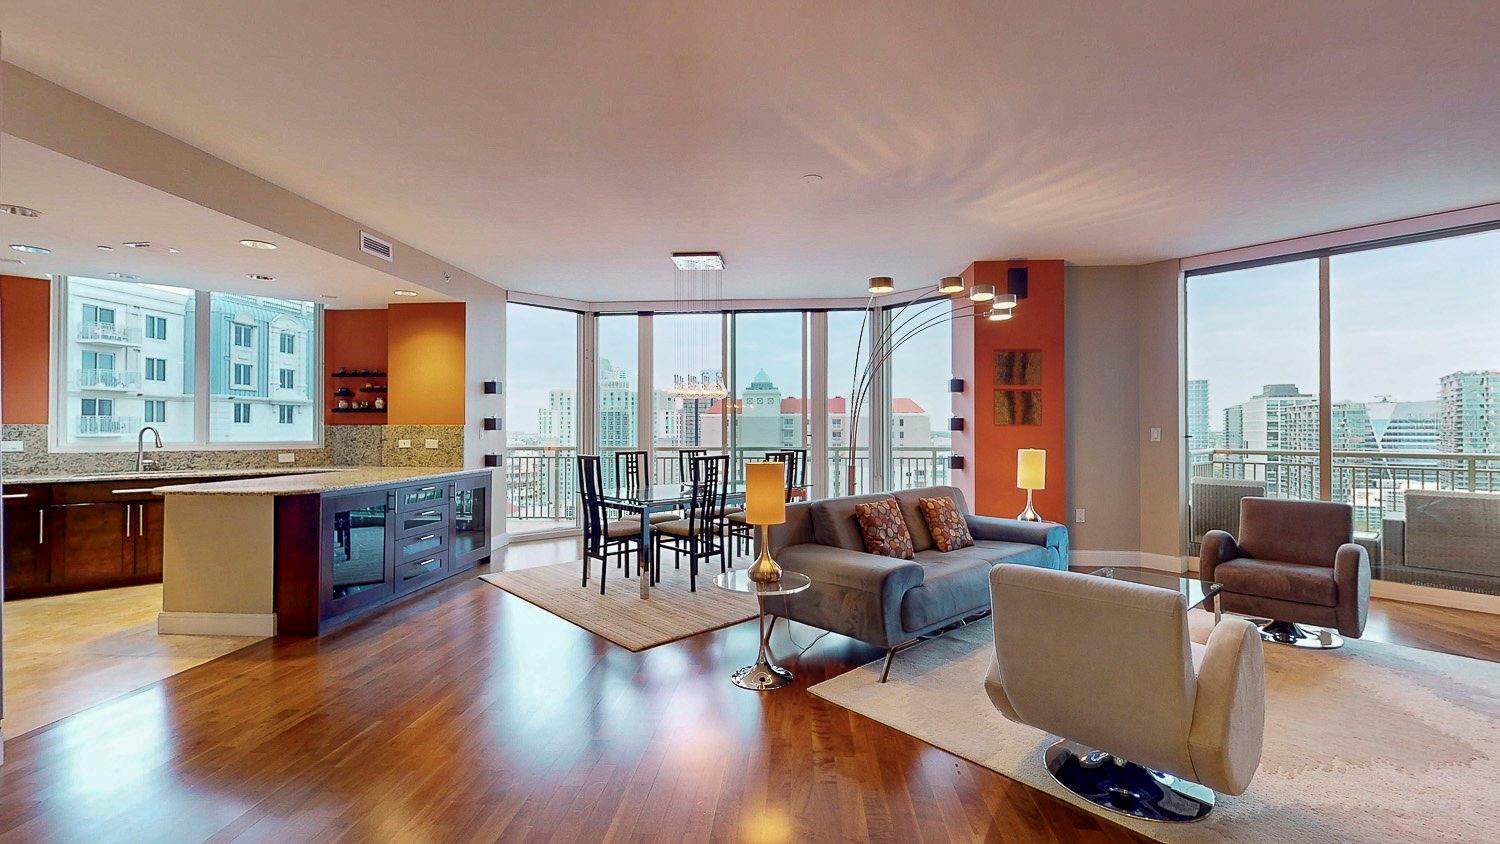 Bask in natural light and picturesque views in the living/dining area, complete with private balcony access.